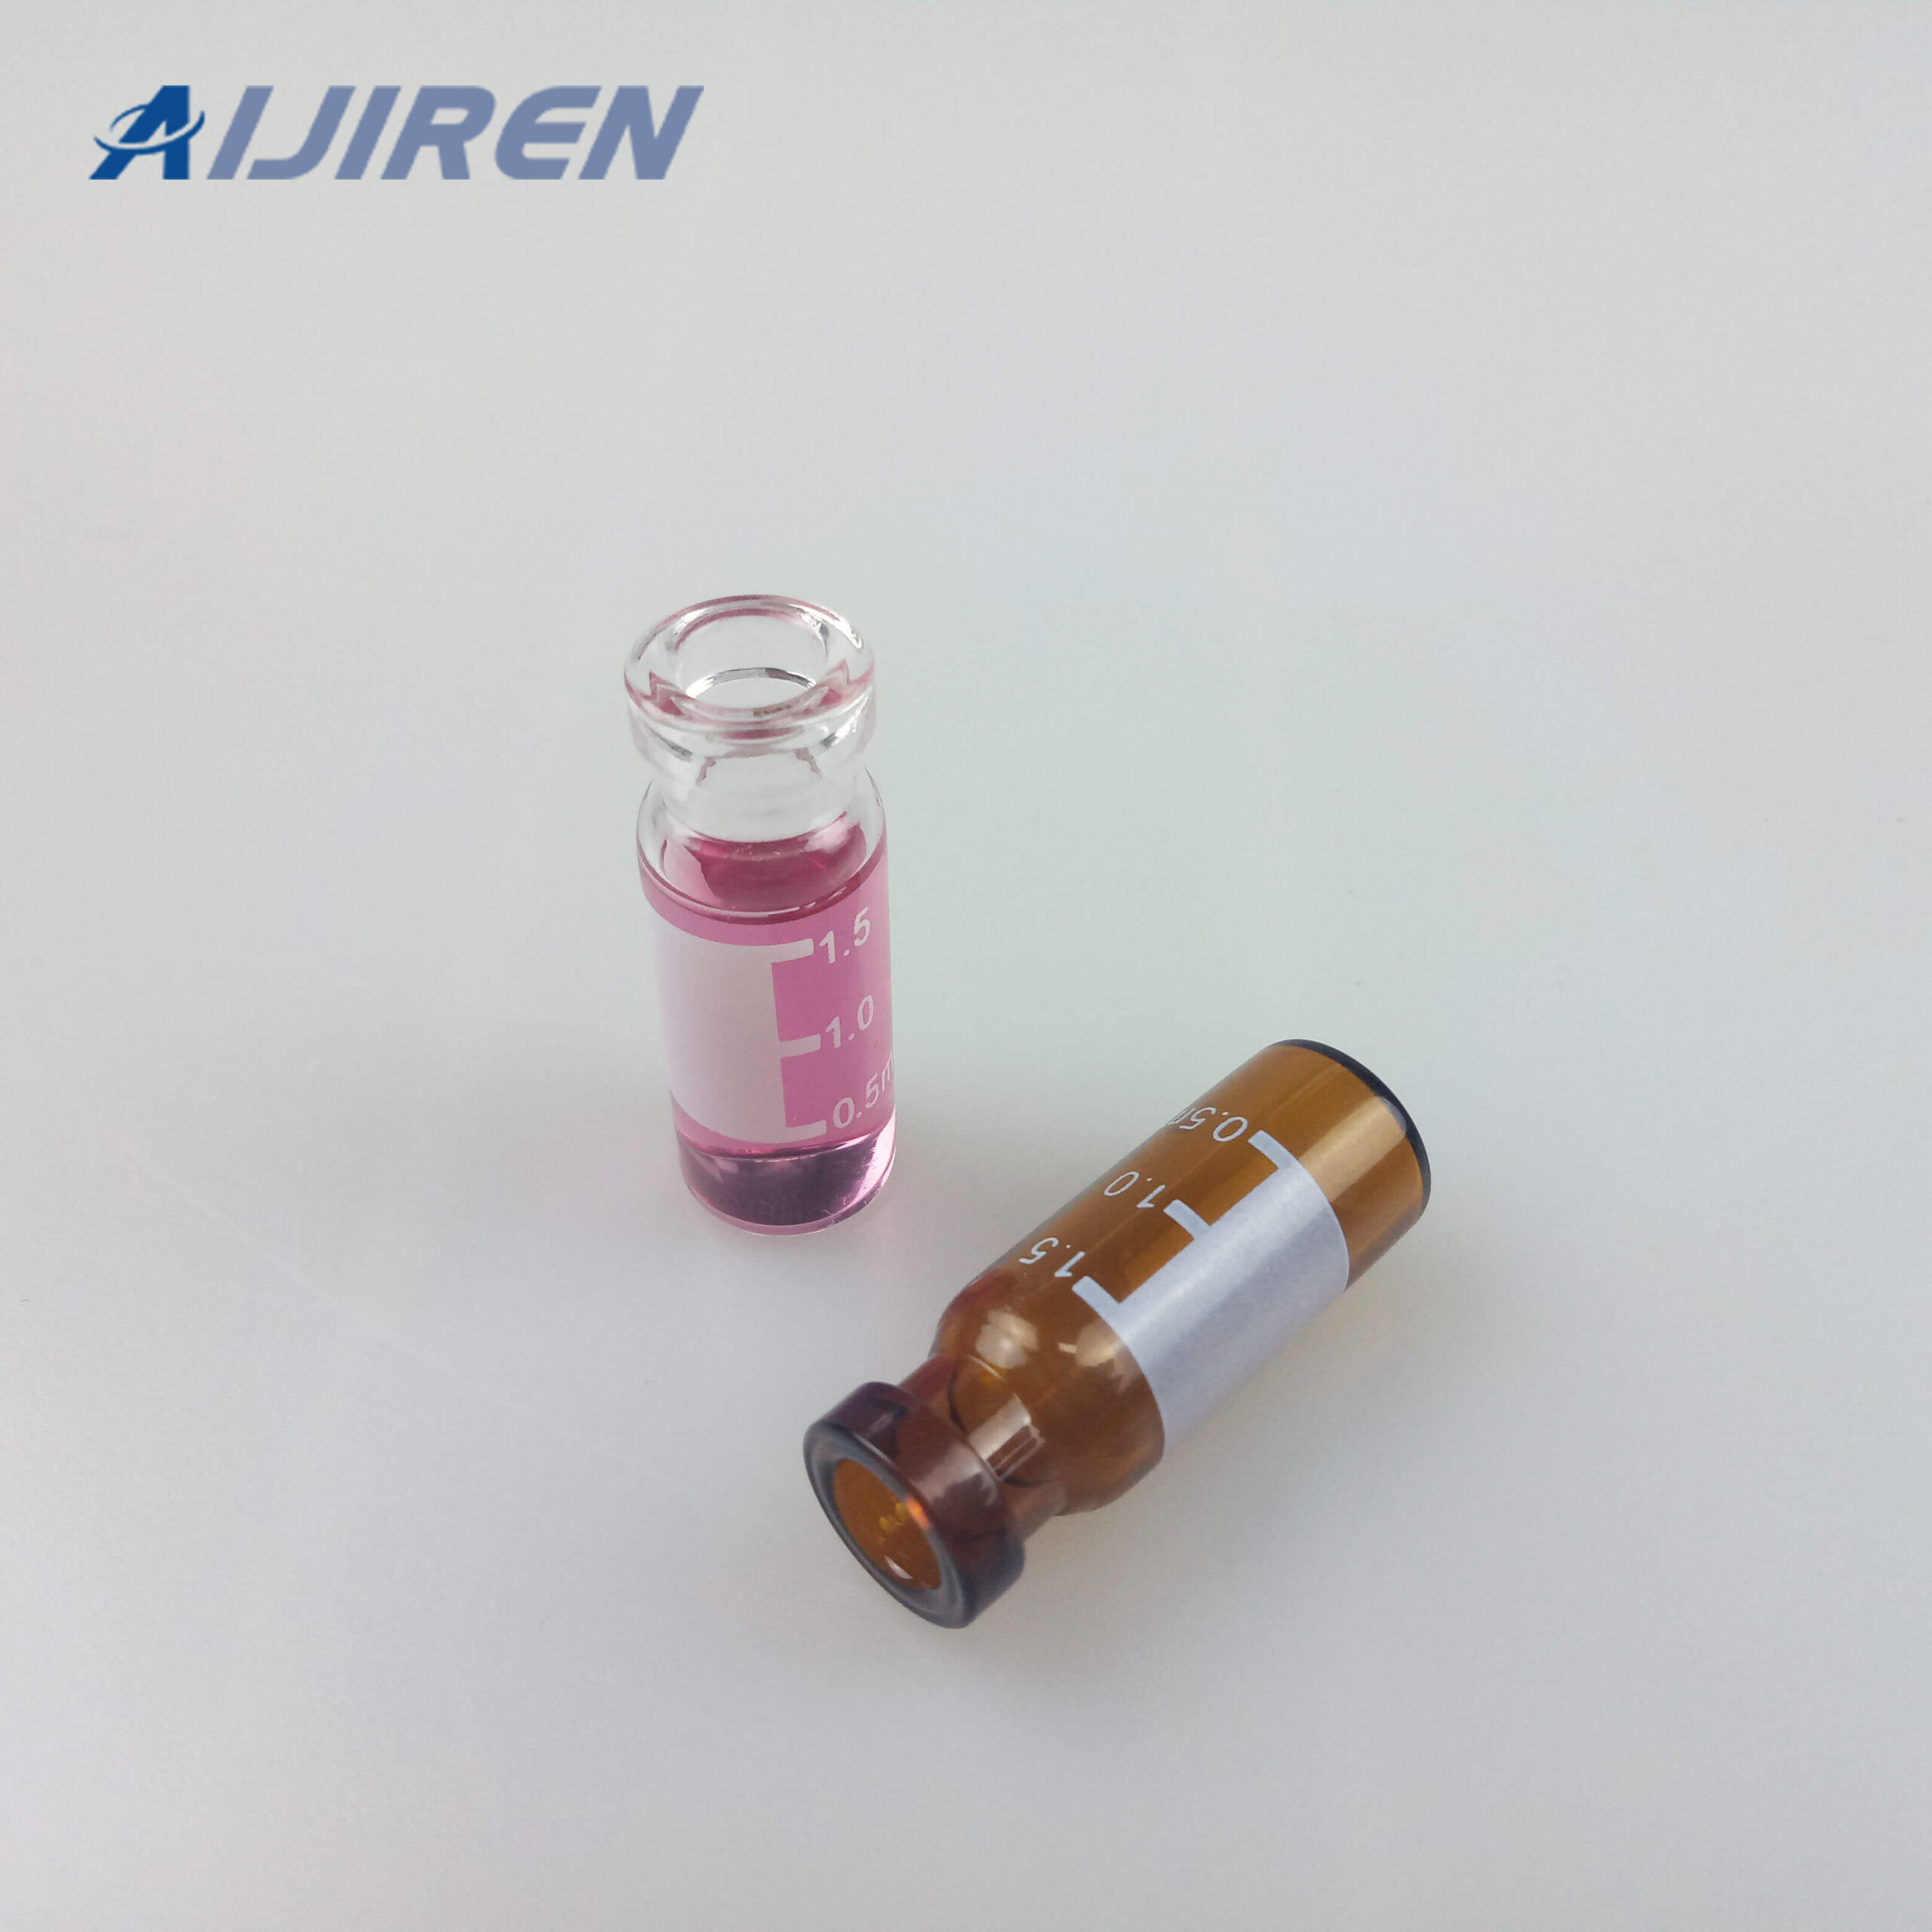 20ml headspace vial2ml Crimp Top Chromatography Vial with Label Area